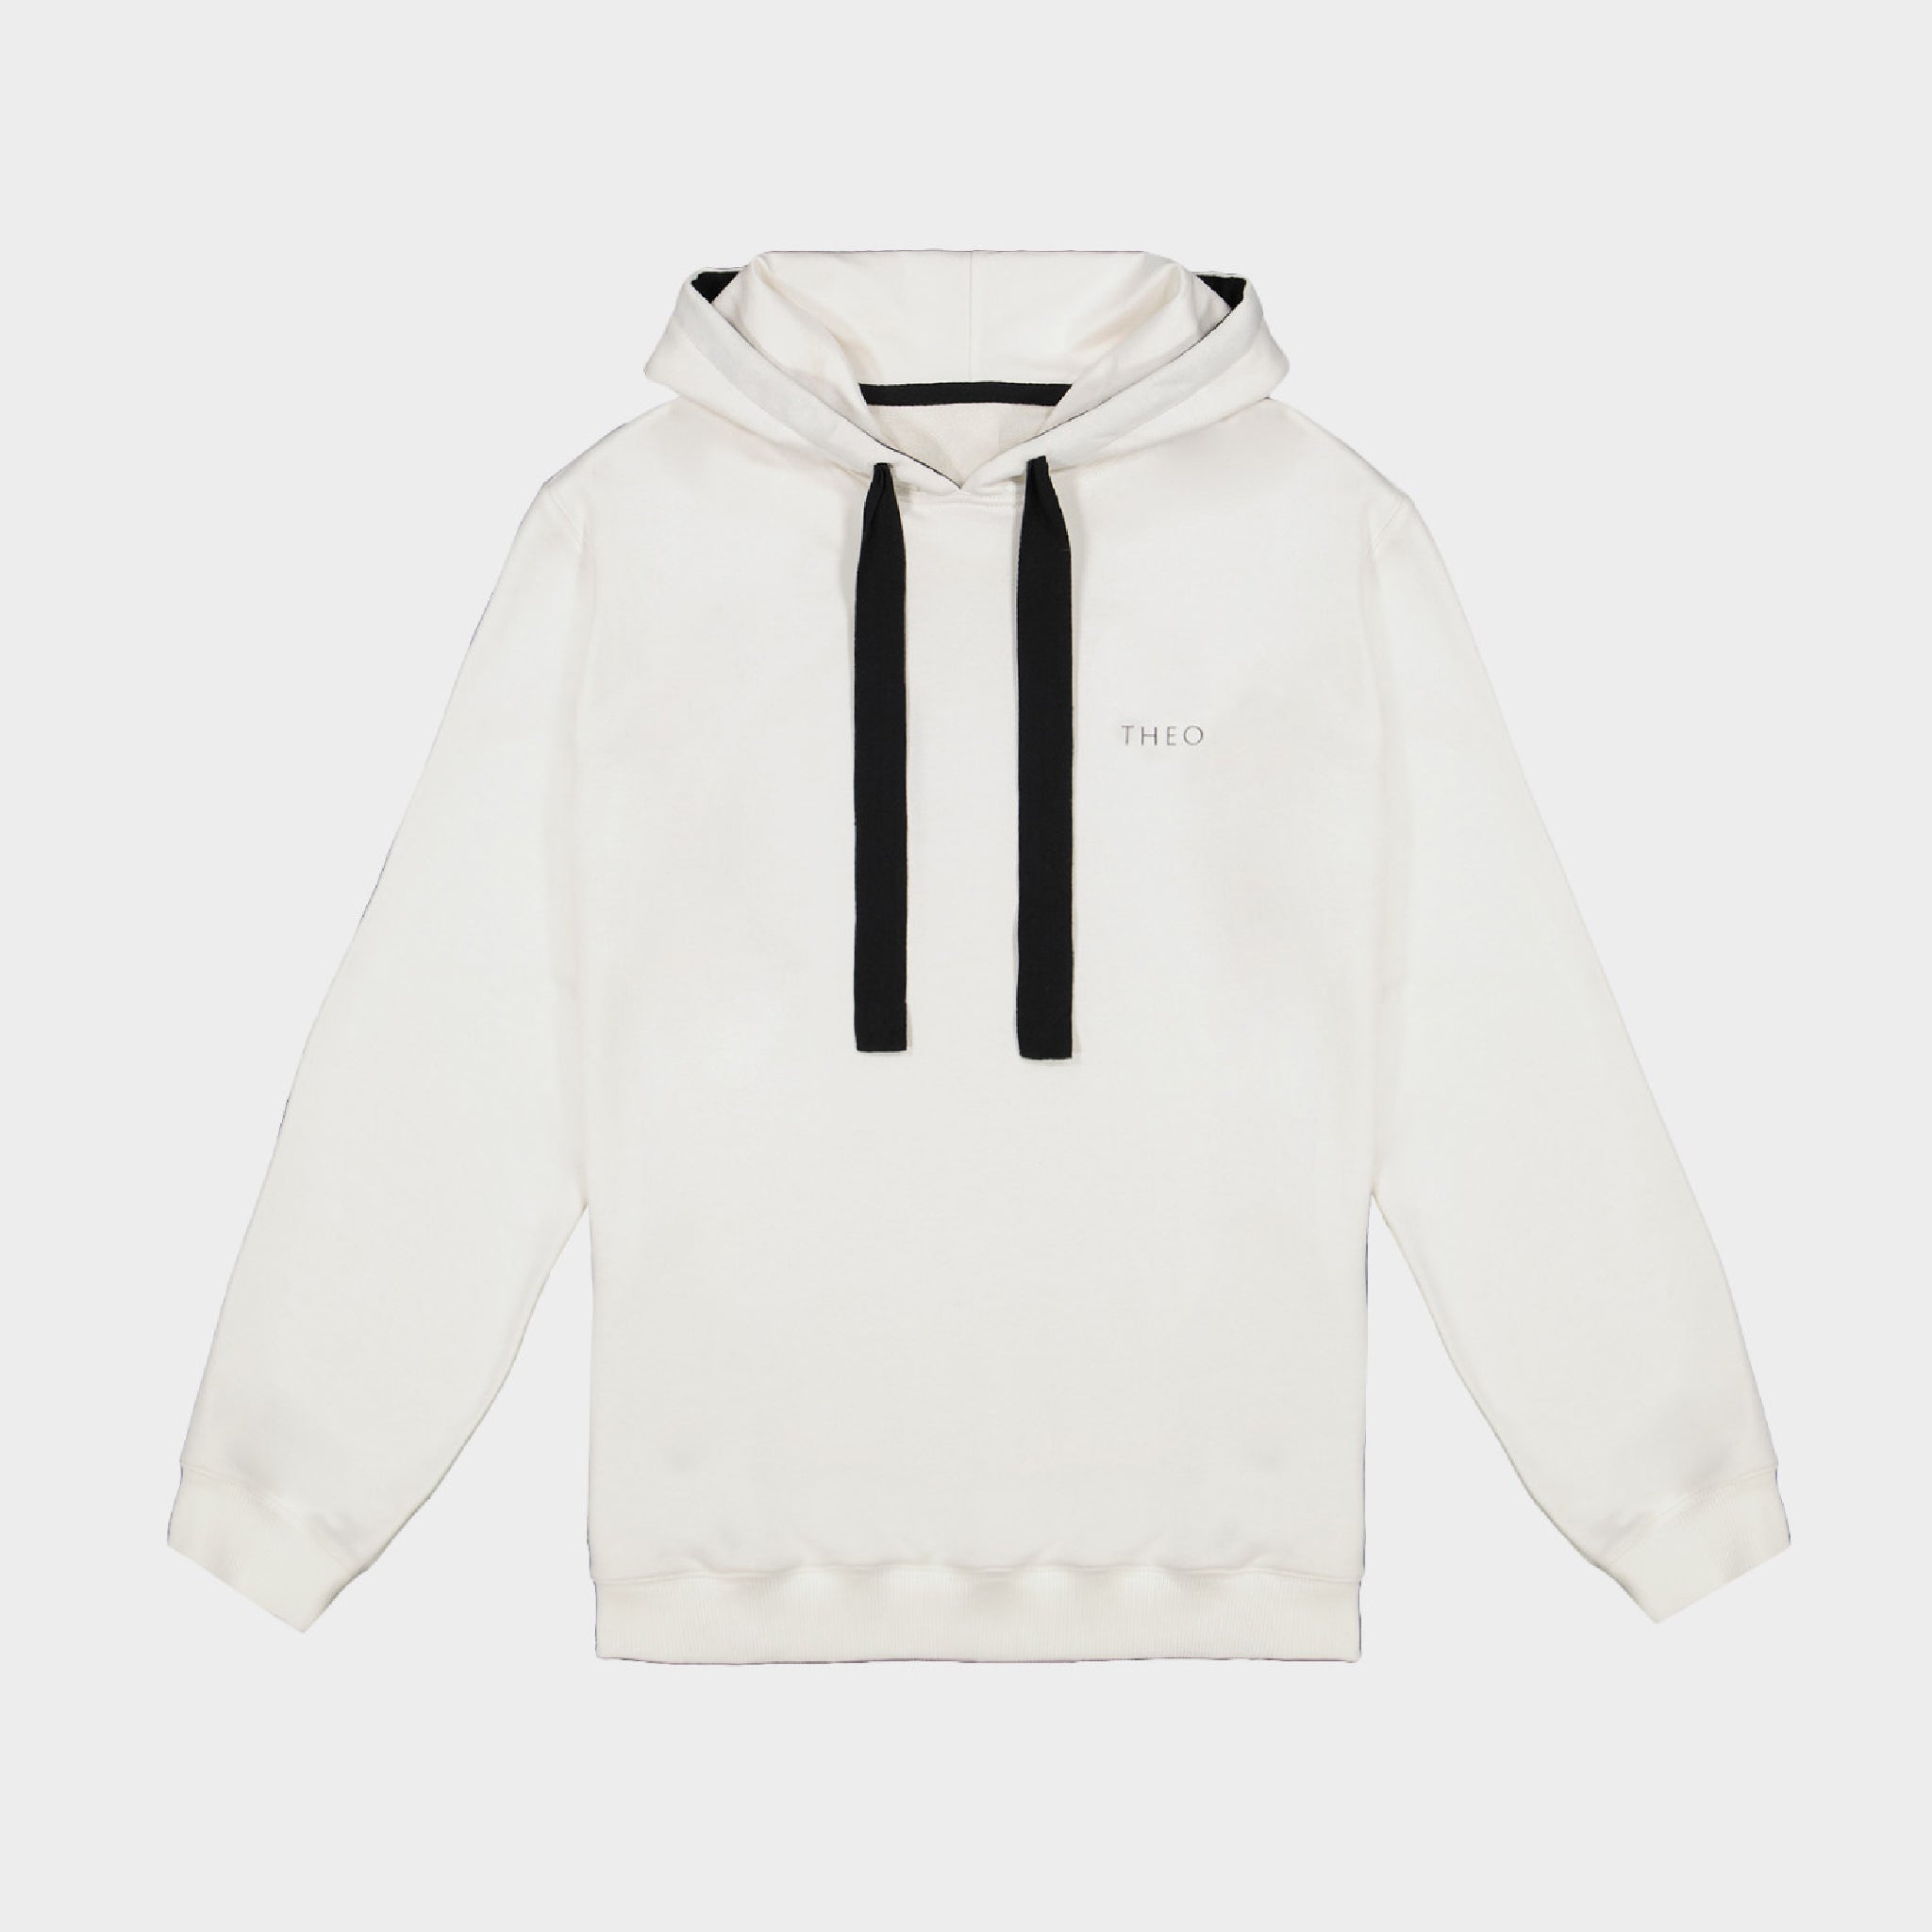 WHITE HOODIE WITH THEO LOGO